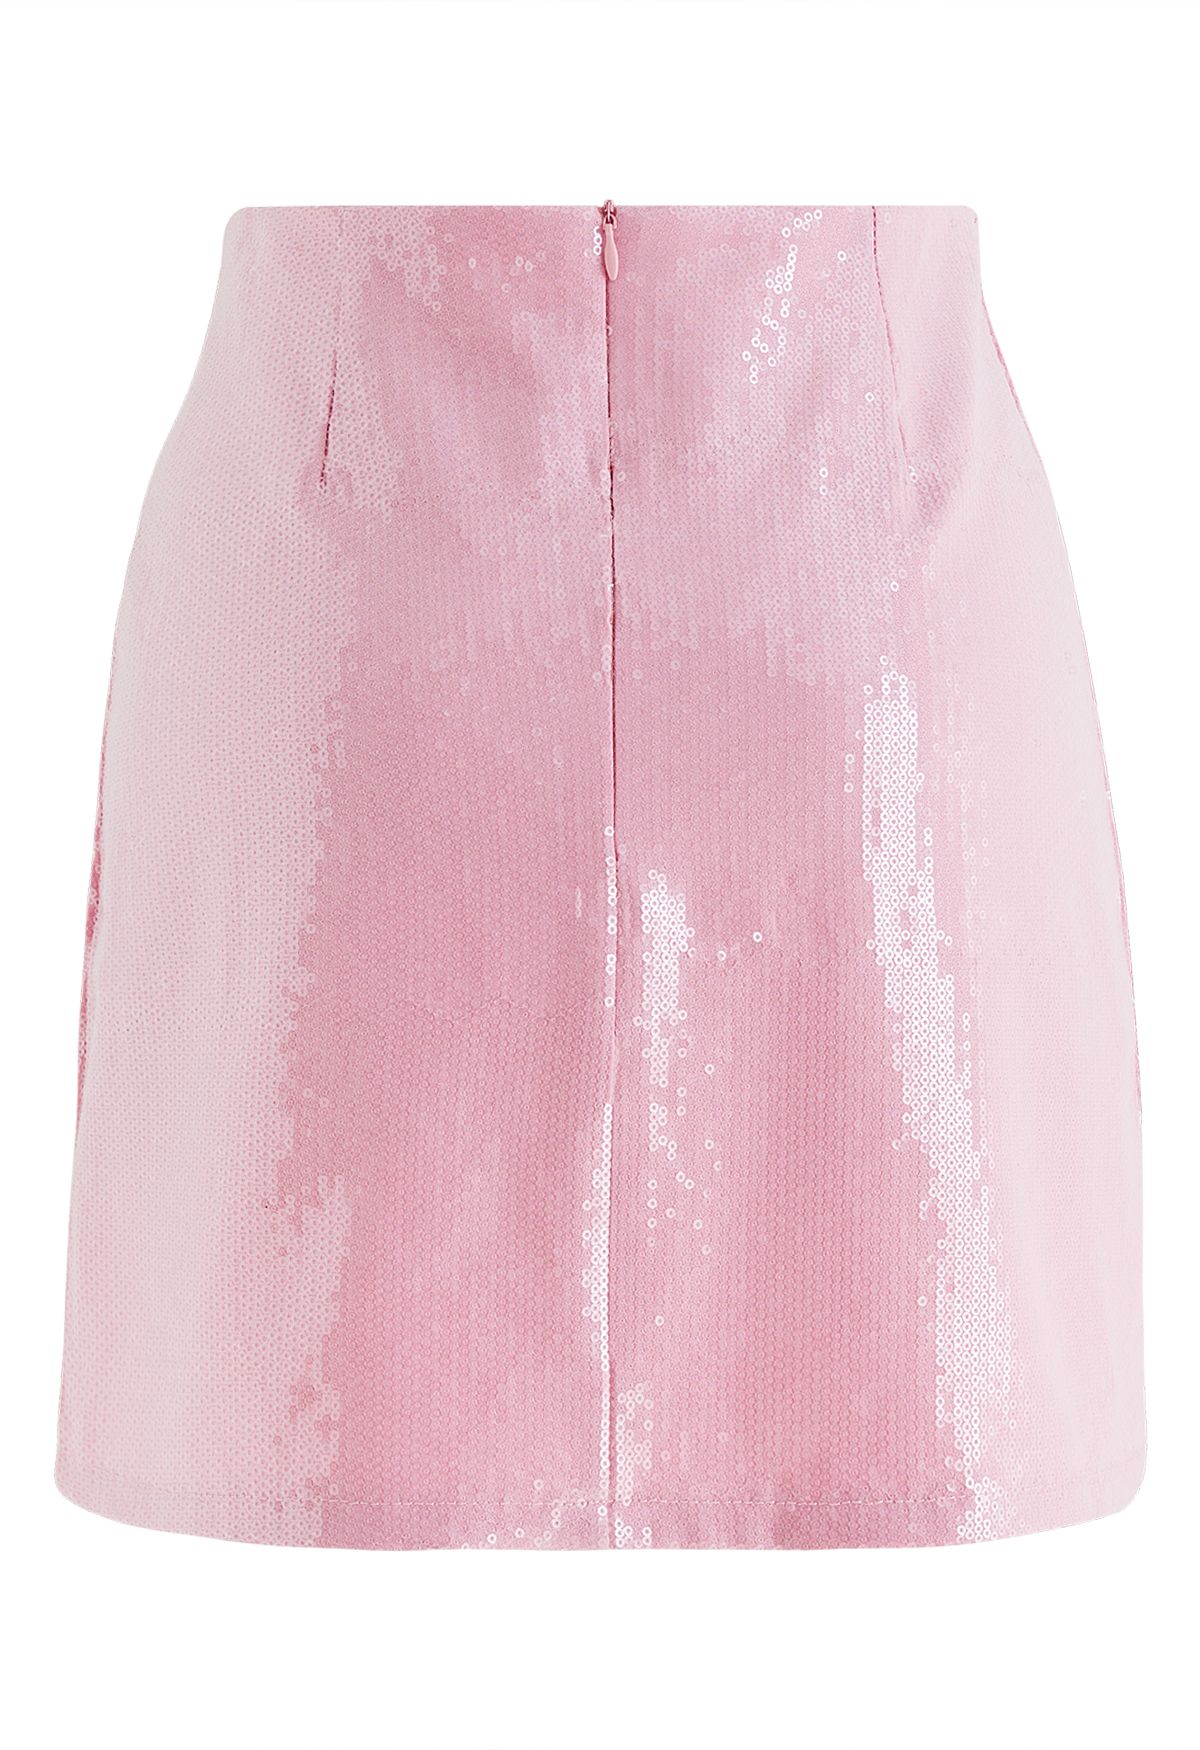 Scintillating Sequin Embellished Mini Bud Skirt in Pink